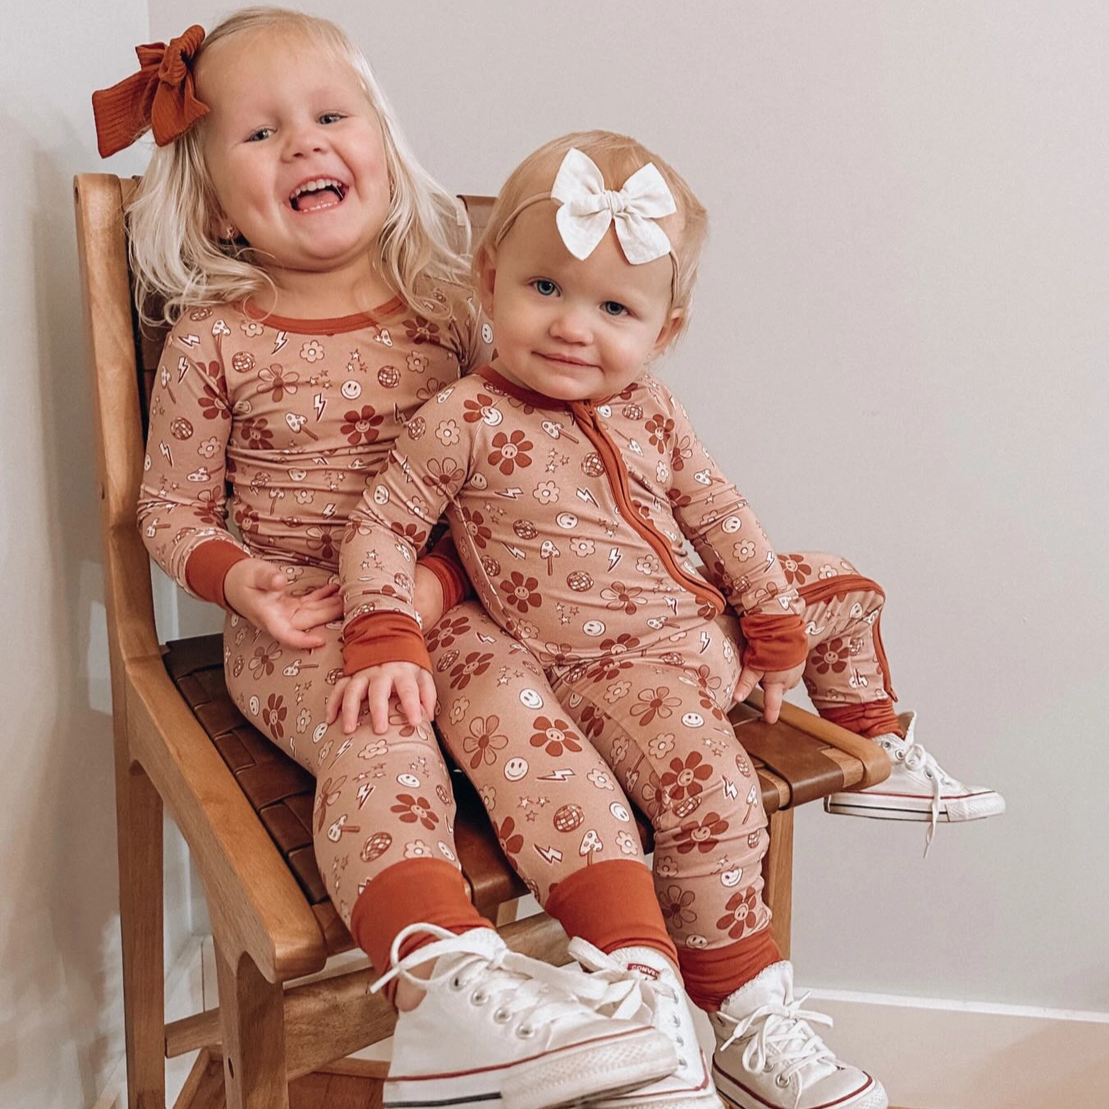 Daisy Girl Bamboo Romper - Remi And Friends